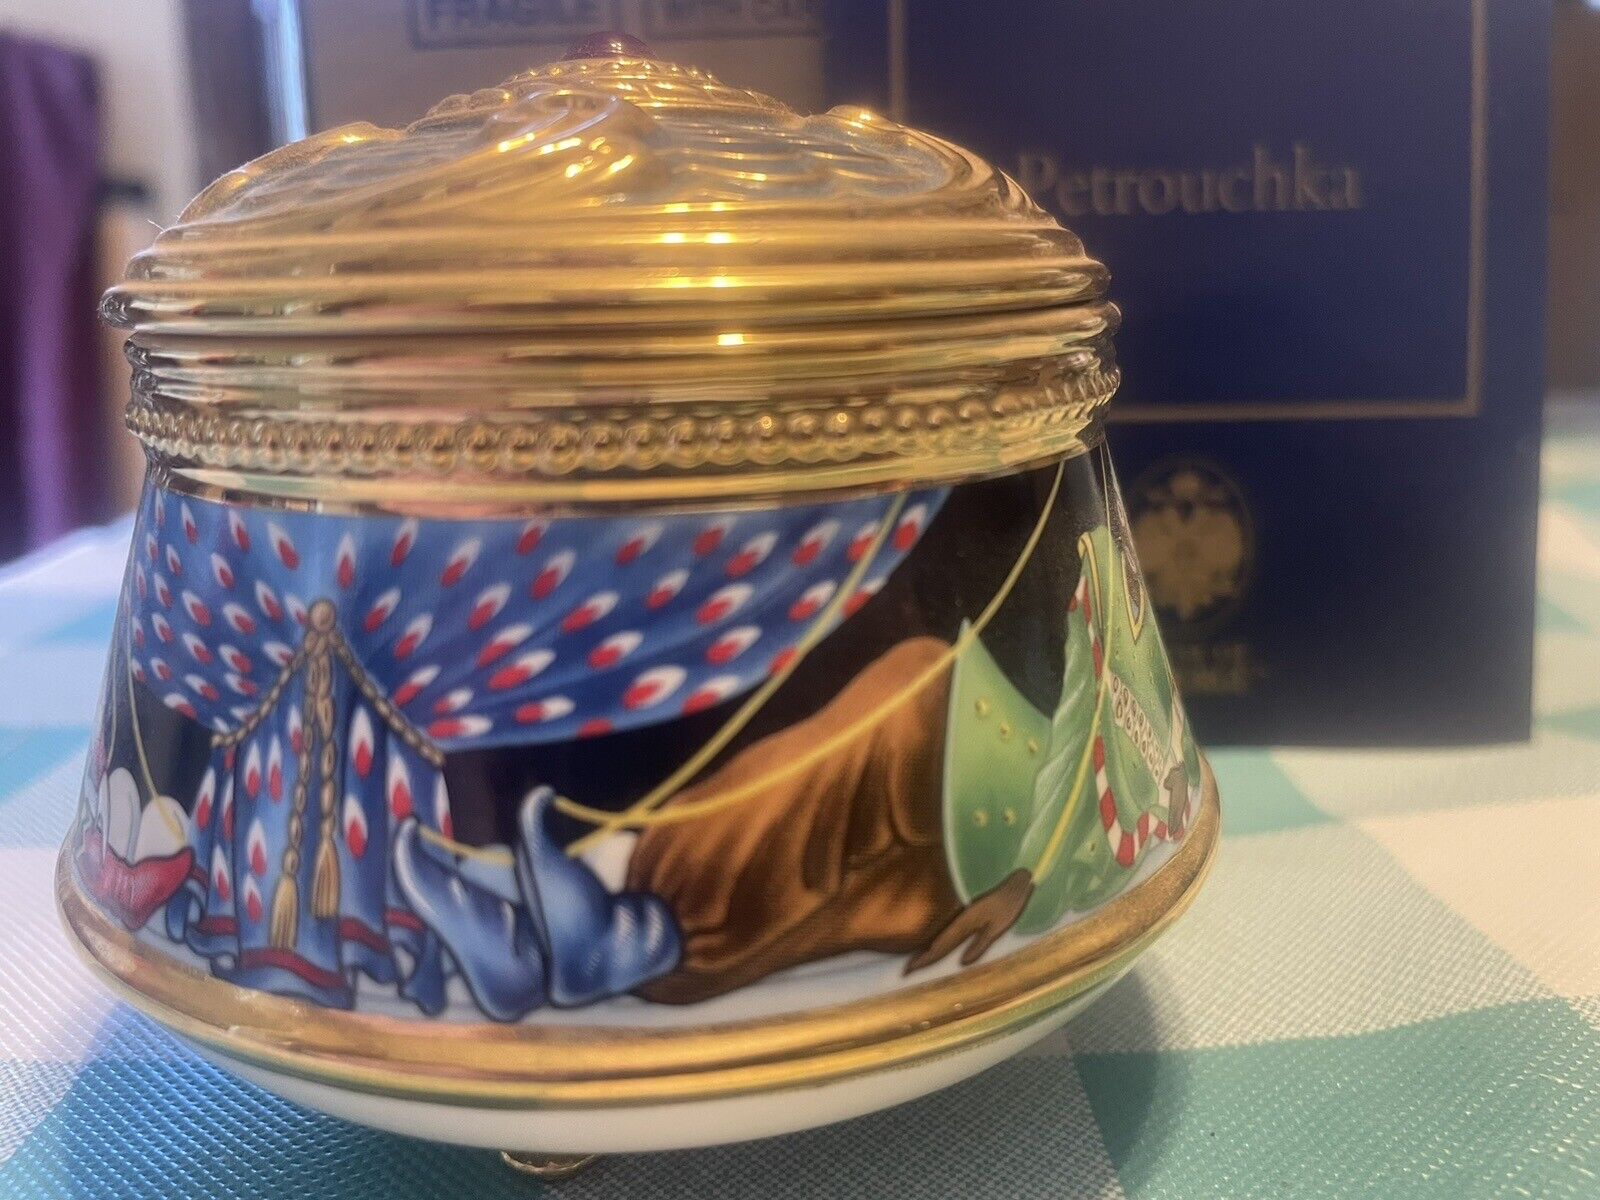 House of Faberge “Petrouchka”” from Imperial Music Box Collection w/original box